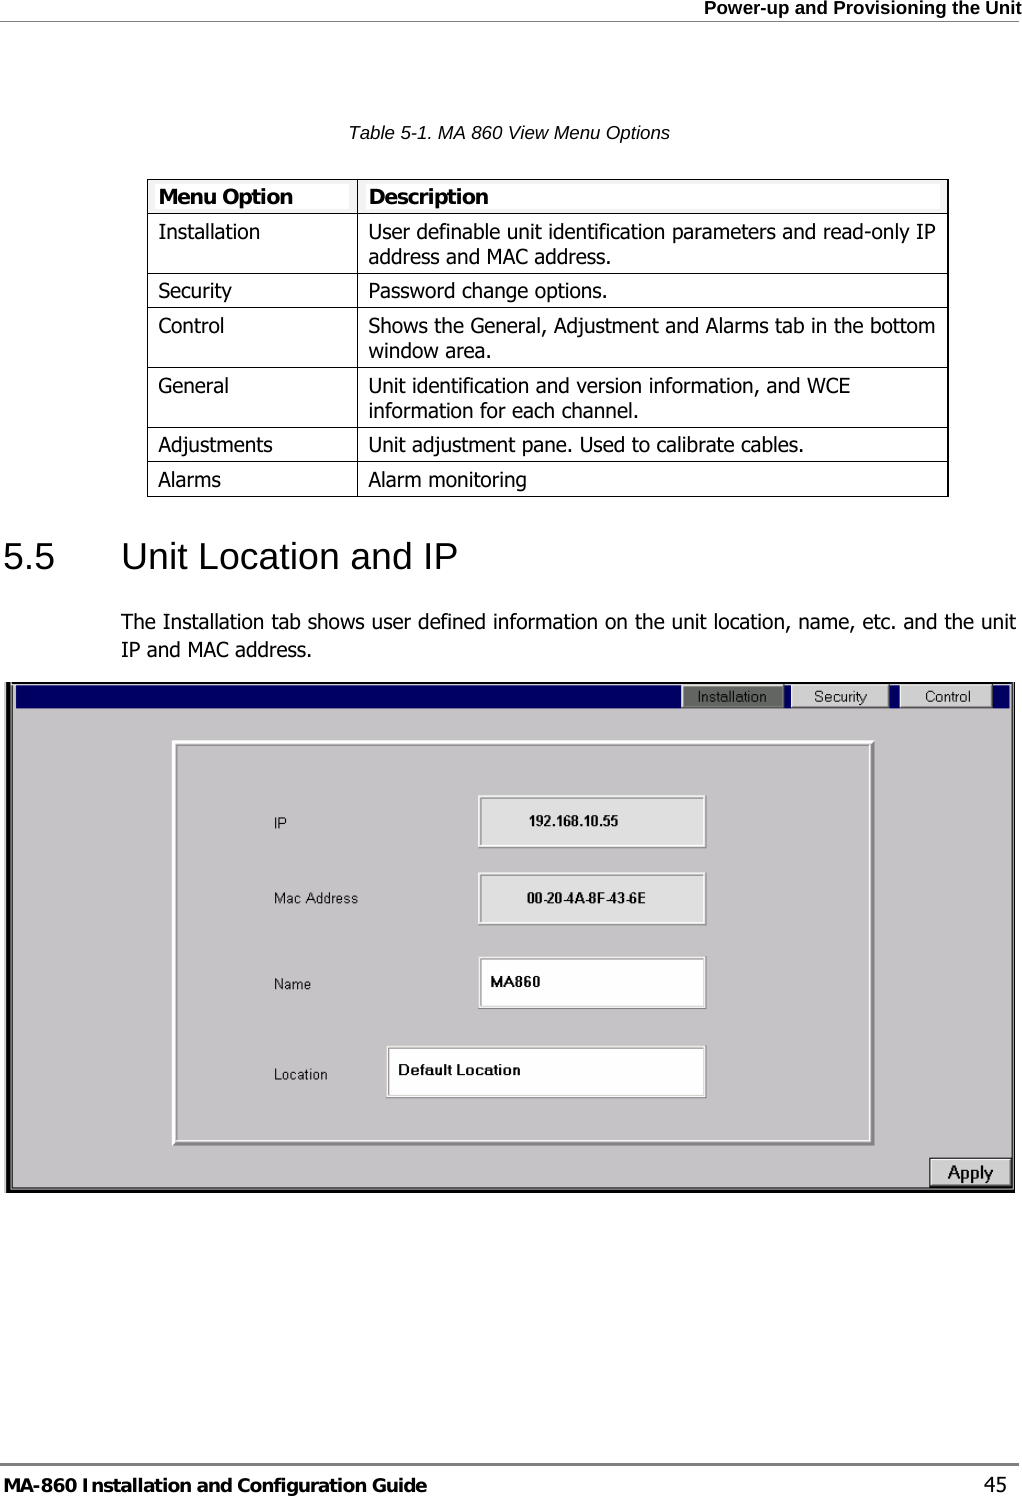  Power-up and Provisioning the Unit  Table  5-1. MA 860 View Menu Options  Menu Option  Description Installation User definable unit identification parameters and read-only IP address and MAC address.Security Password change options.Control Shows the General, Adjustment and Alarms tab in the bottom window area.General  Unit identification and version information, and WCE information for each channel. Adjustments Unit adjustment pane. Used to calibrate cables.Alarms  Alarm monitoring 5.5  Unit Location and IP  The Installation tab shows user defined information on the unit location, name, etc. and the unit IP and MAC address.    MA-860 Installation and Configuration Guide    45 